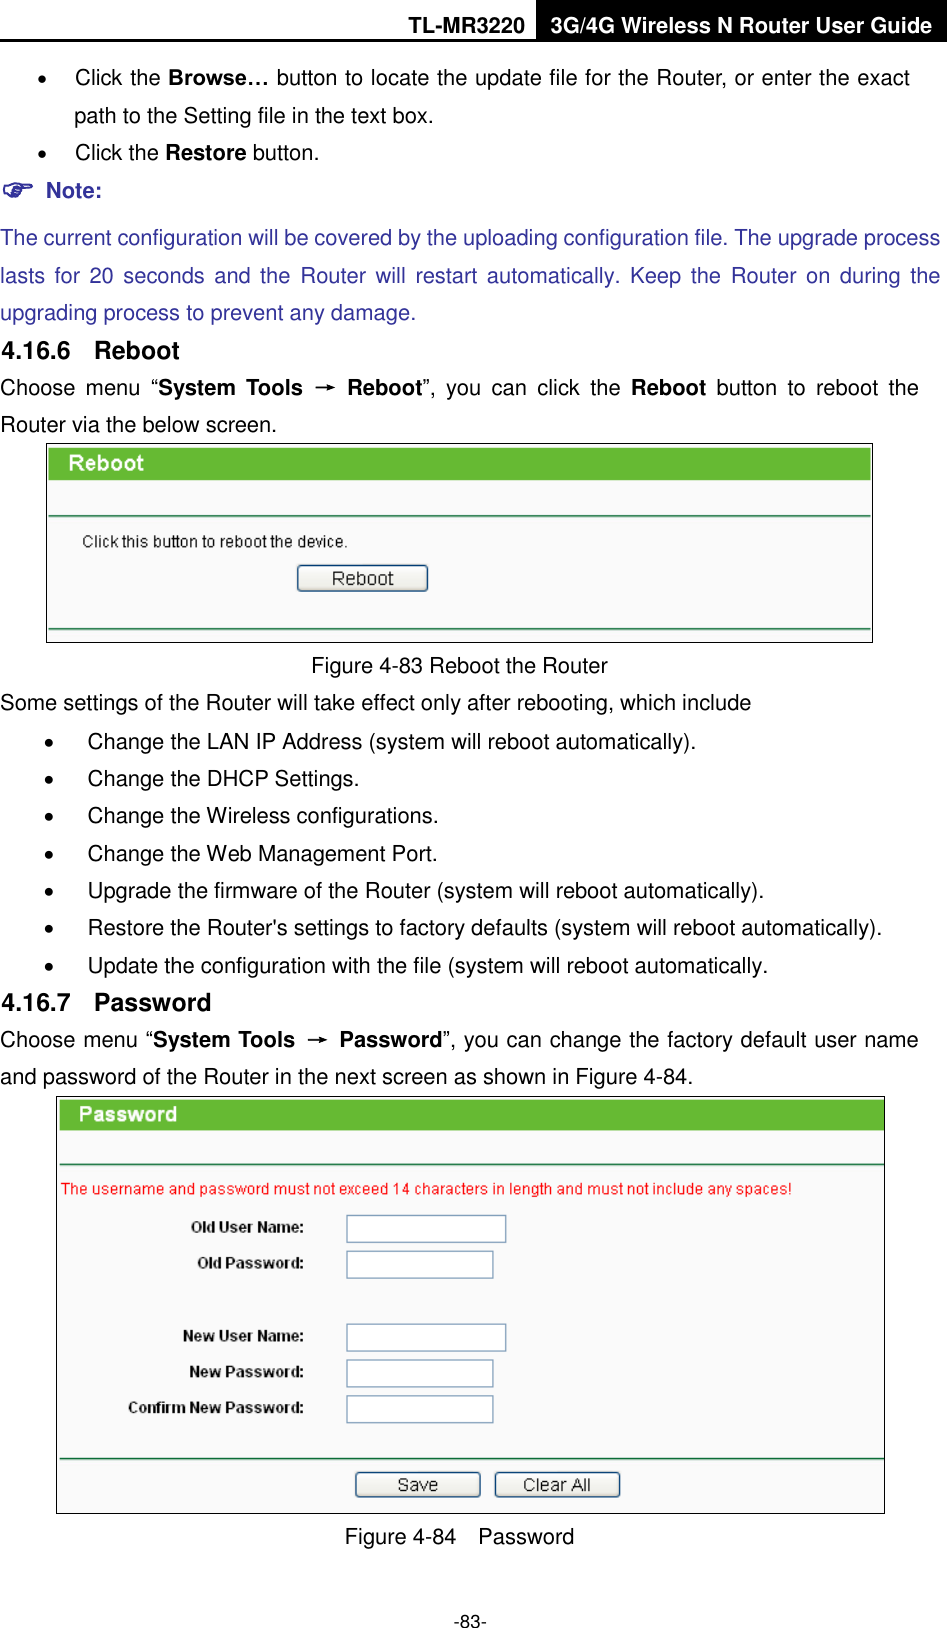 TL-MR3220 3G/4G Wireless N Router User Guide  -83-  Click the Browse… button to locate the update file for the Router, or enter the exact path to the Setting file in the text box.  Click the Restore button.  Note: The current configuration will be covered by the uploading configuration file. The upgrade process lasts for 20  seconds and  the  Router will restart automatically. Keep  the  Router  on during the upgrading process to prevent any damage.   4.16.6  Reboot Choose  menu  “System  Tools  →  Reboot”,  you  can  click  the  Reboot  button  to  reboot  the Router via the below screen.  Figure 4-83 Reboot the Router Some settings of the Router will take effect only after rebooting, which include   Change the LAN IP Address (system will reboot automatically).   Change the DHCP Settings.   Change the Wireless configurations.   Change the Web Management Port.   Upgrade the firmware of the Router (system will reboot automatically).   Restore the Router&apos;s settings to factory defaults (system will reboot automatically).   Update the configuration with the file (system will reboot automatically. 4.16.7  Password Choose menu “System Tools  →  Password”, you can change the factory default user name and password of the Router in the next screen as shown in Figure 4-84.  Figure 4-84  Password 